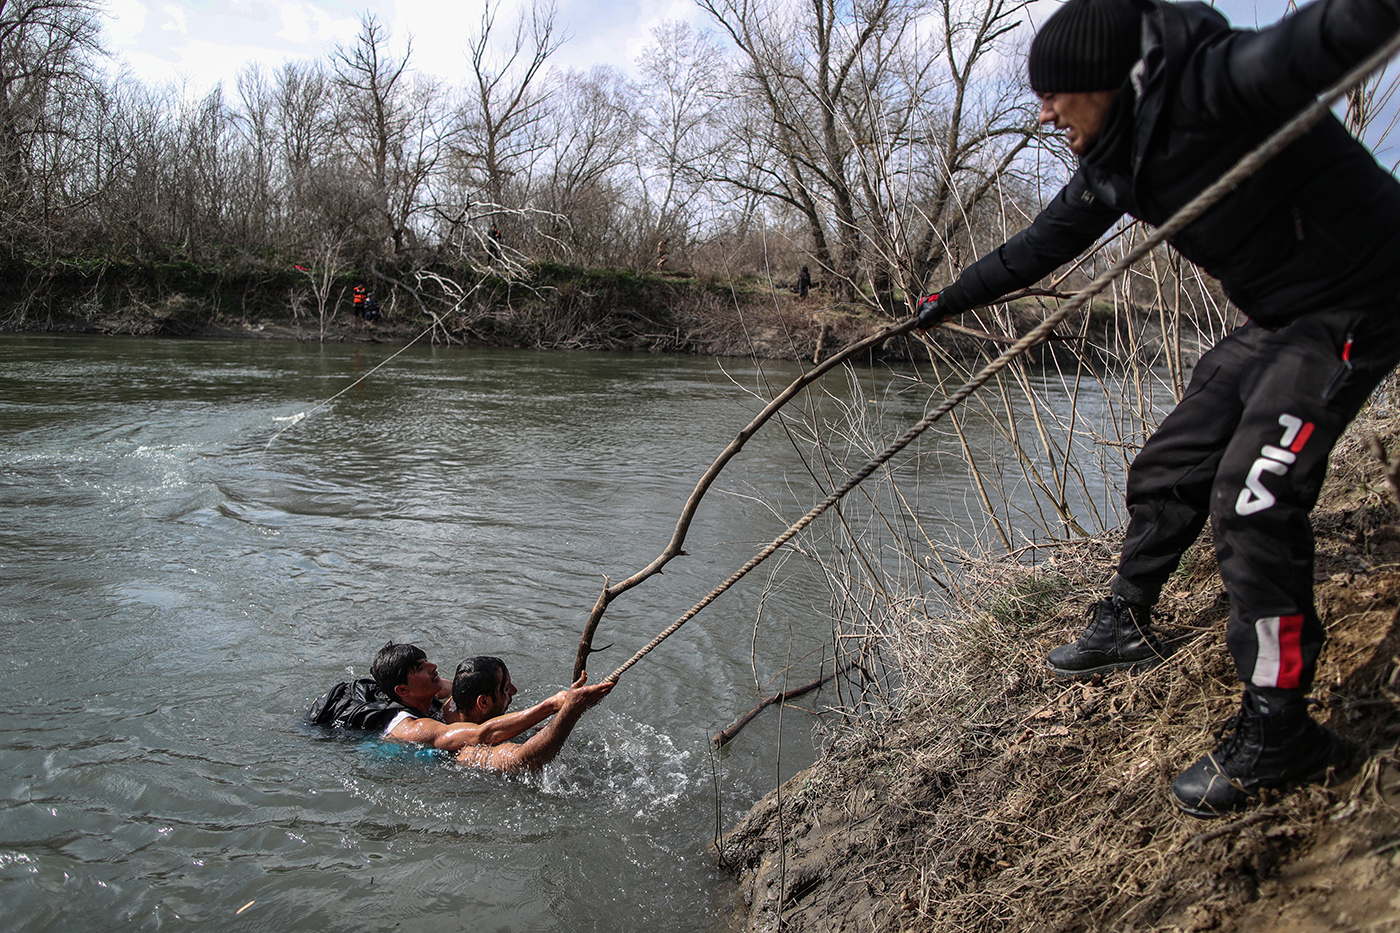 Refugees back to Turkish side with the help of a rope after they stuck for two days at a small island on the Meric (Evros) River to reach Greek territory as they try to reach to Europe, at the Turkish-Greek border, in Edirne, Turkey, 01 March 2020.